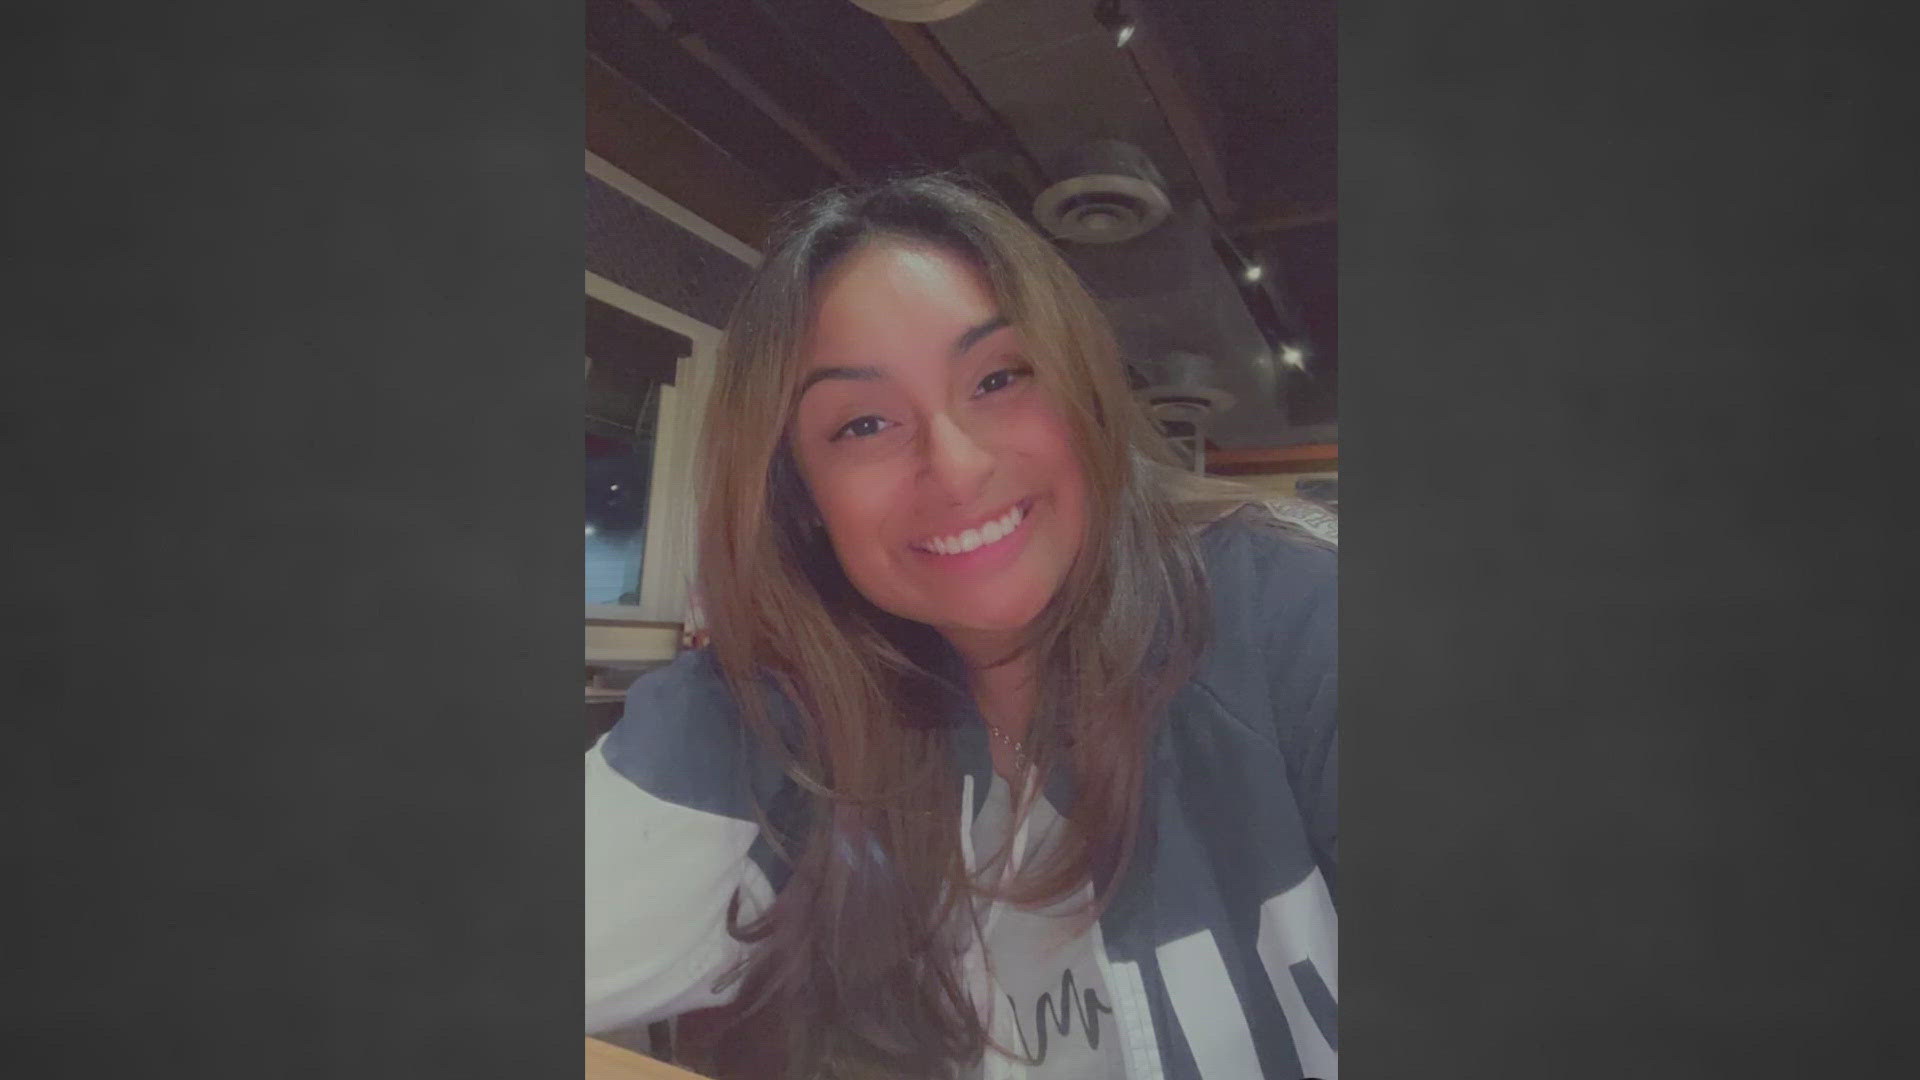 23-year-old Katia Duenas-Aguilar of Mesquite was found murdered inside a home near the Kentucky-Tennessee border.